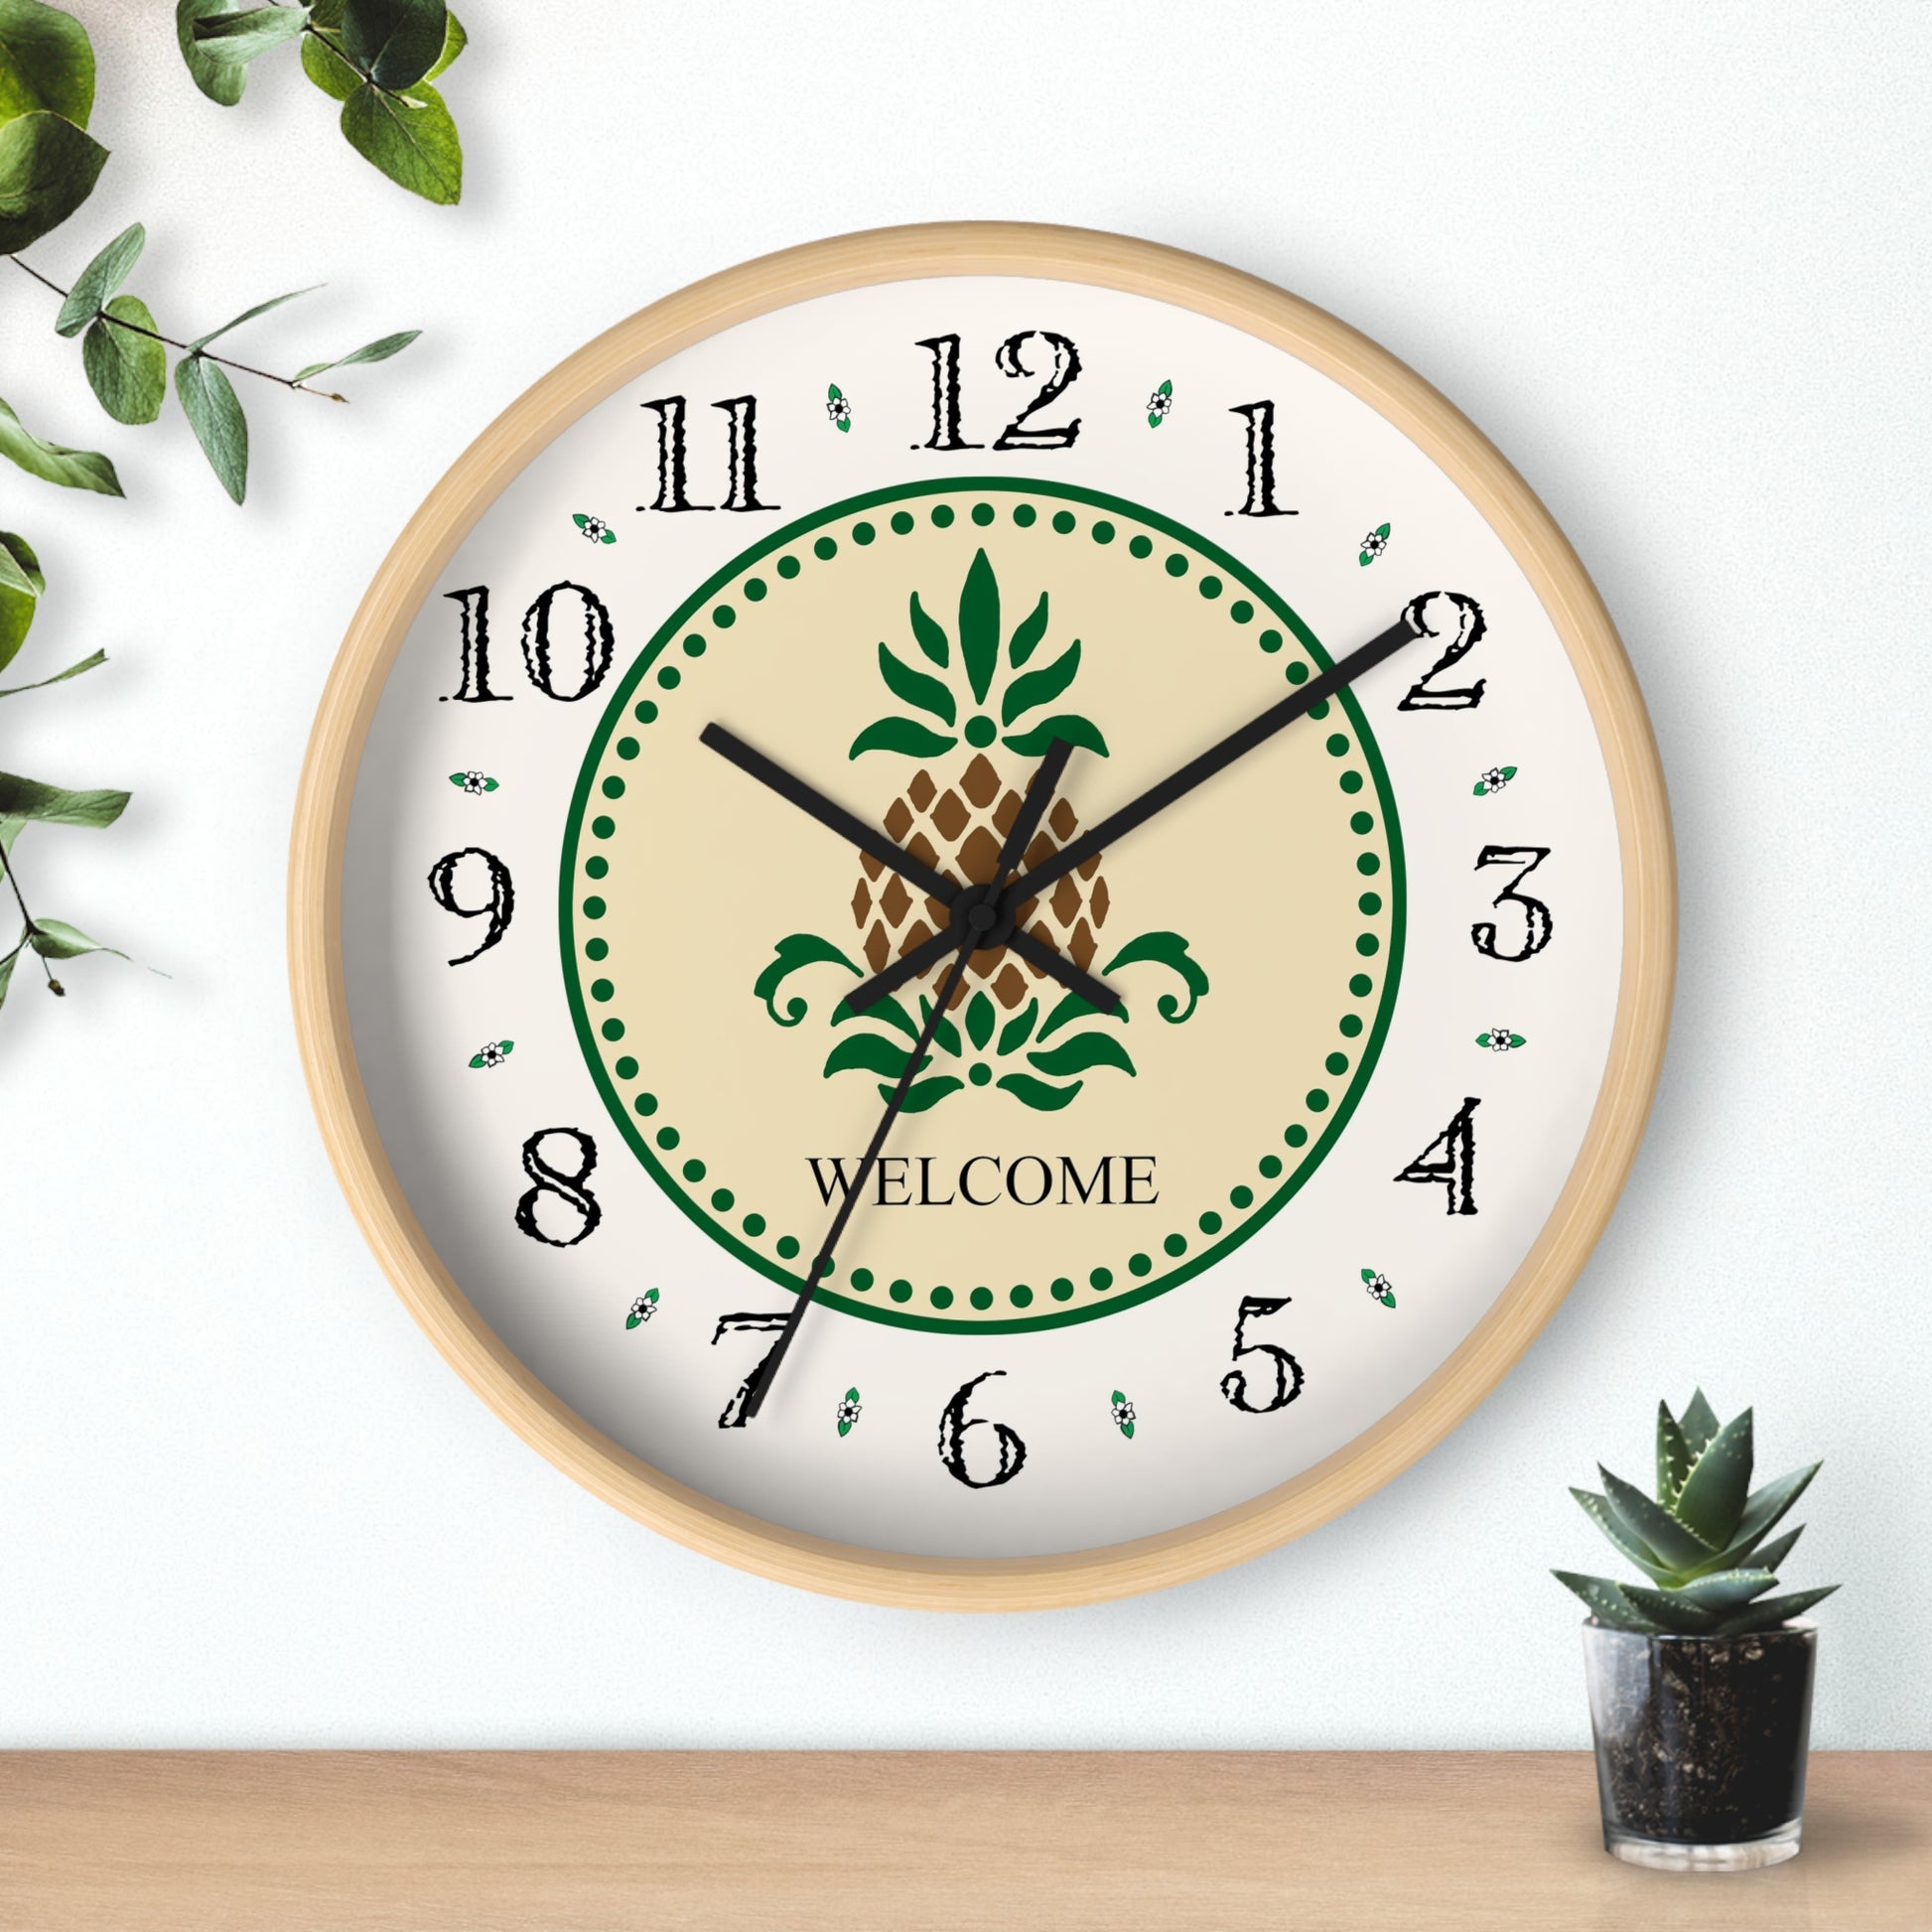 The Welcome Folk Art Design Heirloom Designer Collection Wall Clock features a pineapple and the word "Welcome". The pineapple has long been a symbol of welcome and hospitality. Place this stunning Folk Art Design clock on your wall and say "Welcome!" to all who visit and enjoy your special hospitality.   The clock image is a reproduction of an original watercolor by Lee M. Buchanan.